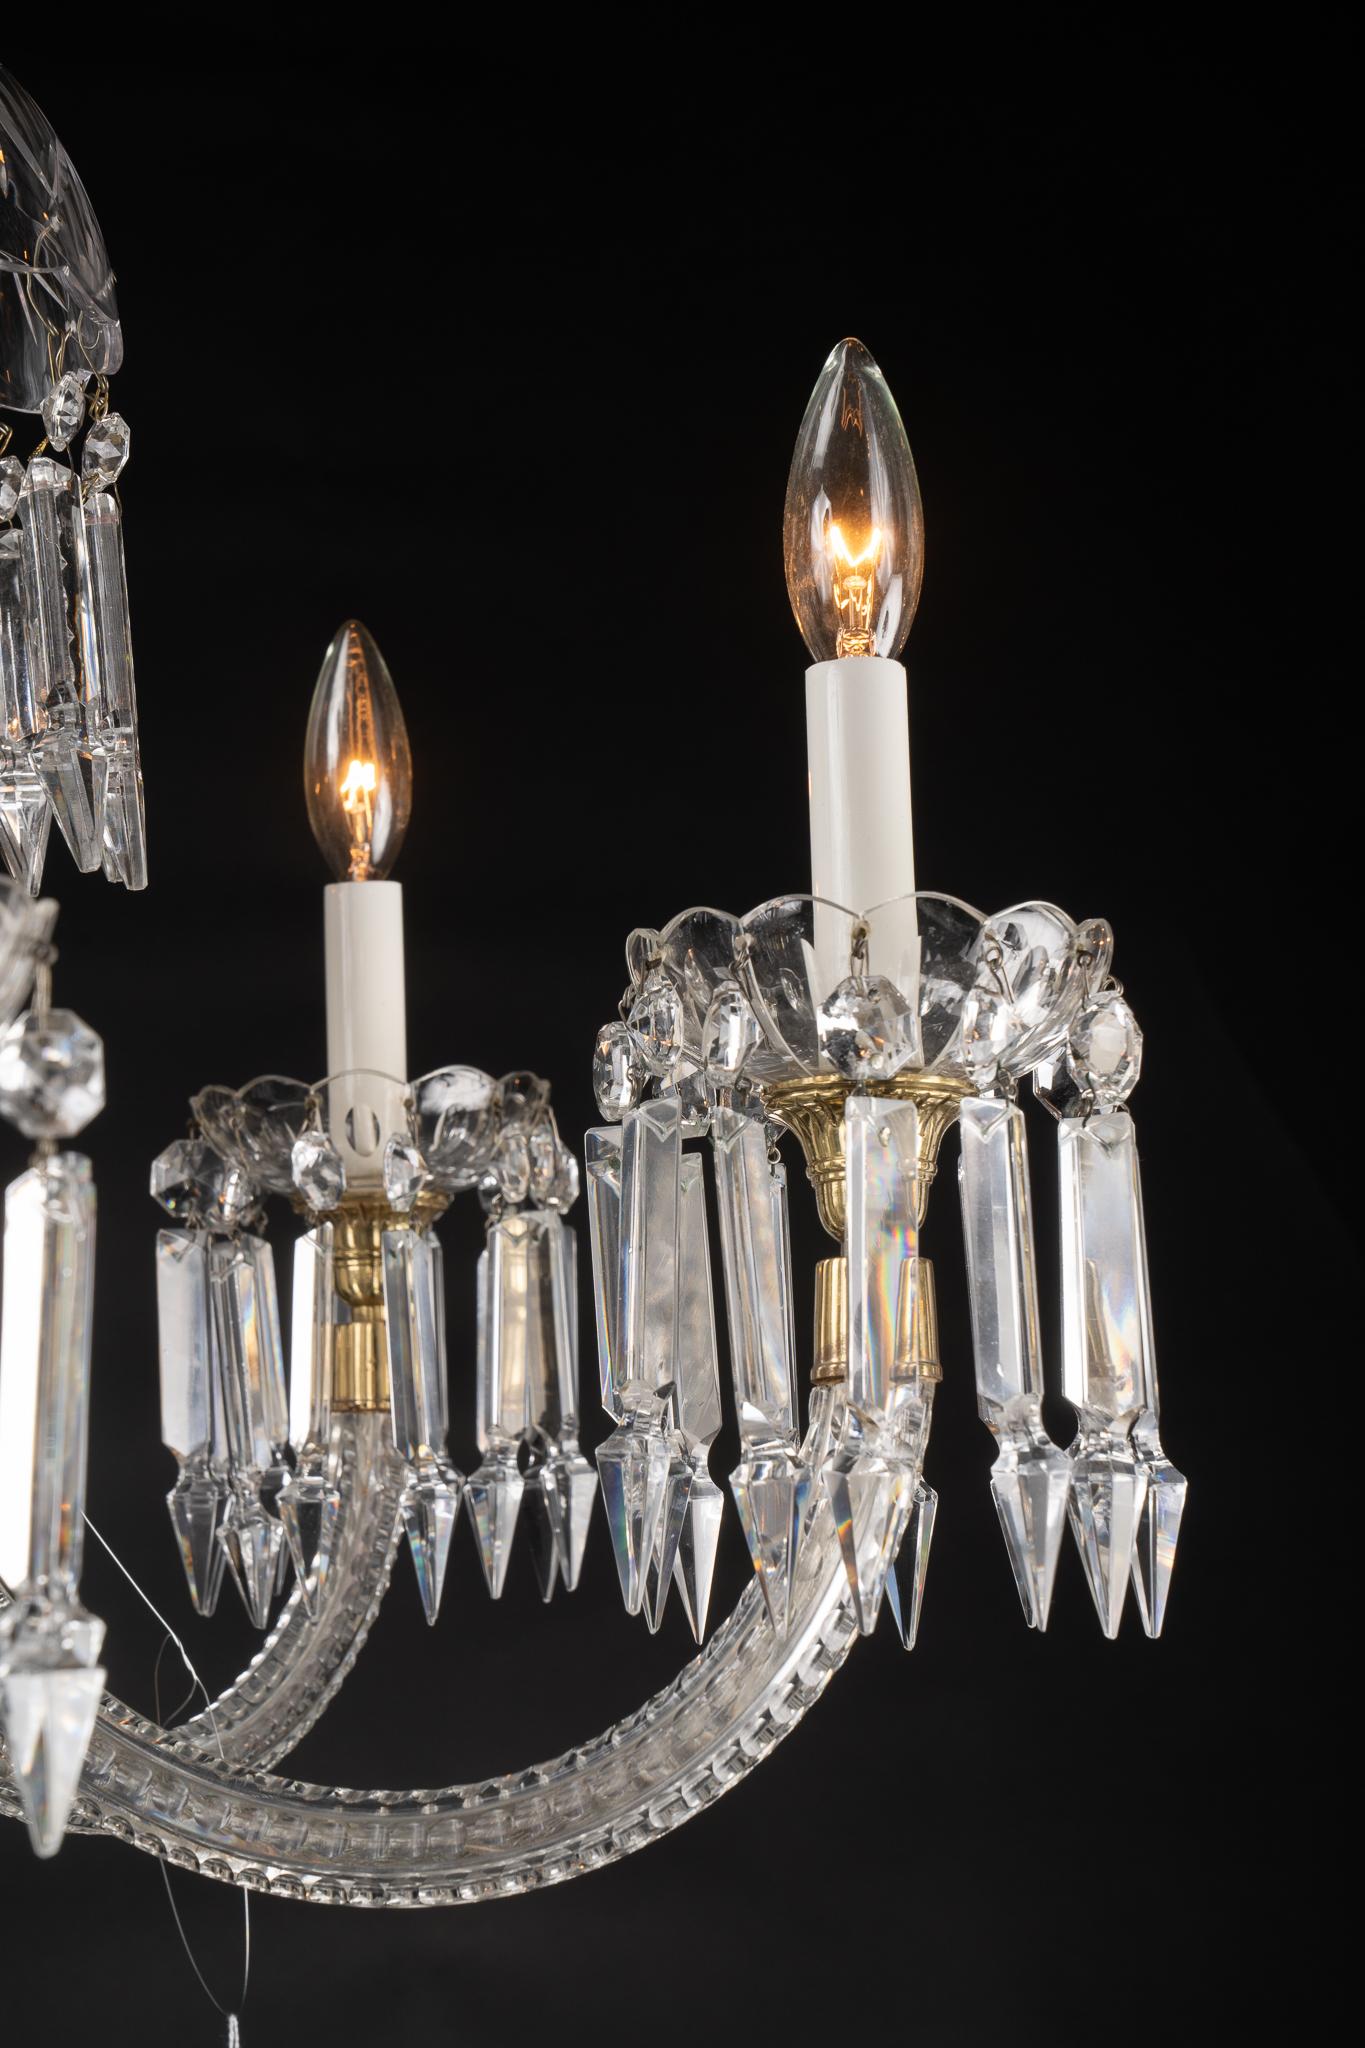 This French crystal chandelier dates back to the mid 20th century and offers a unique design. At top we see a crown of scrolling crystal. Moving down the central stem we meet a beautiful and simply patterned crystal bowl from which the six crystal